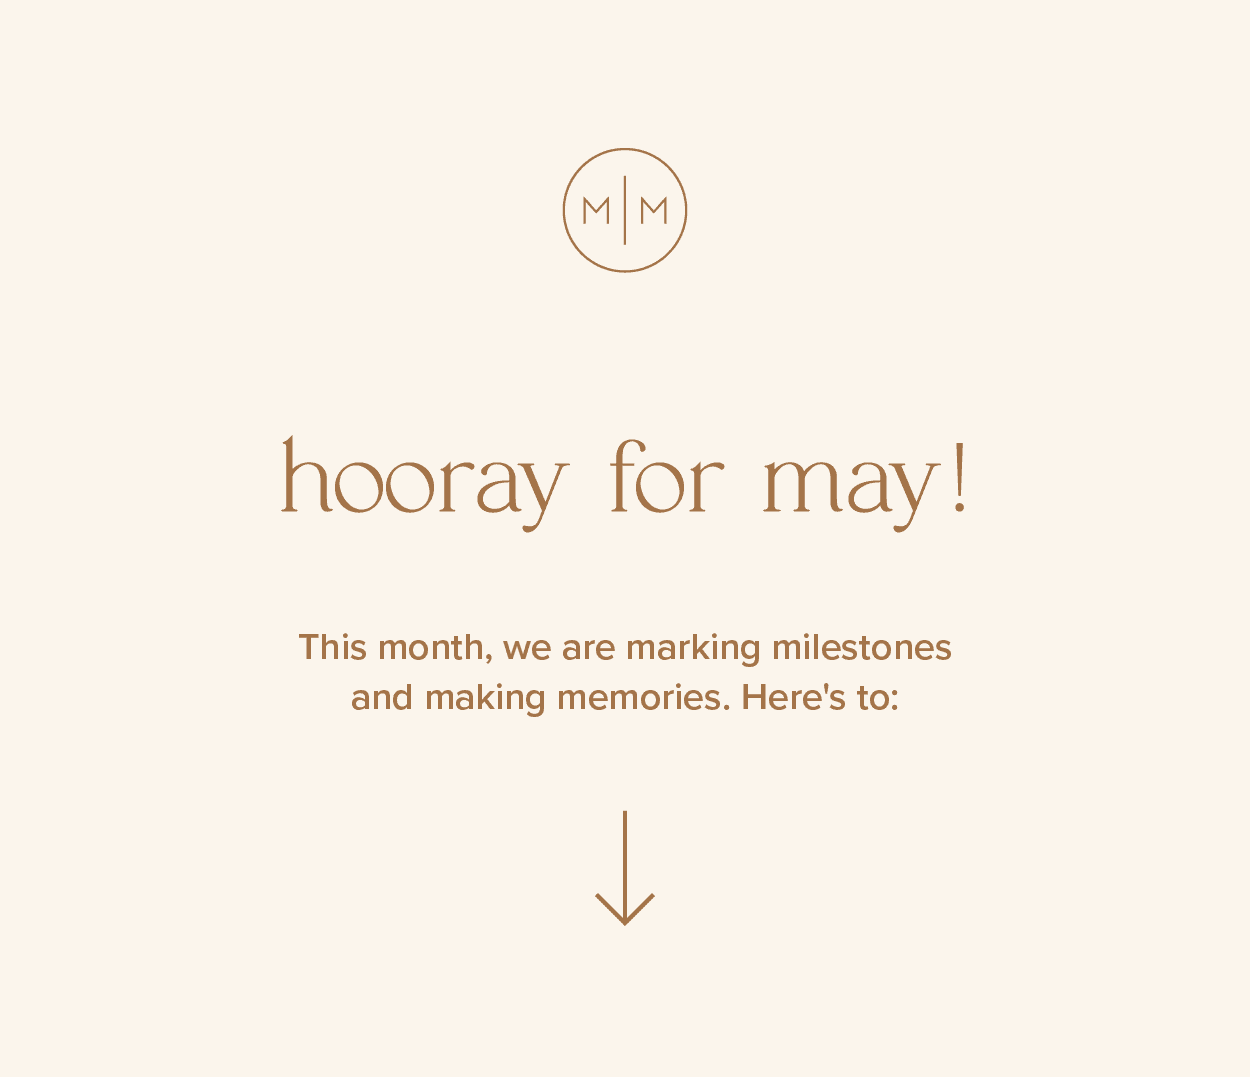 Hooray for May! This month, we are marking milestones and making memories. Here's to: